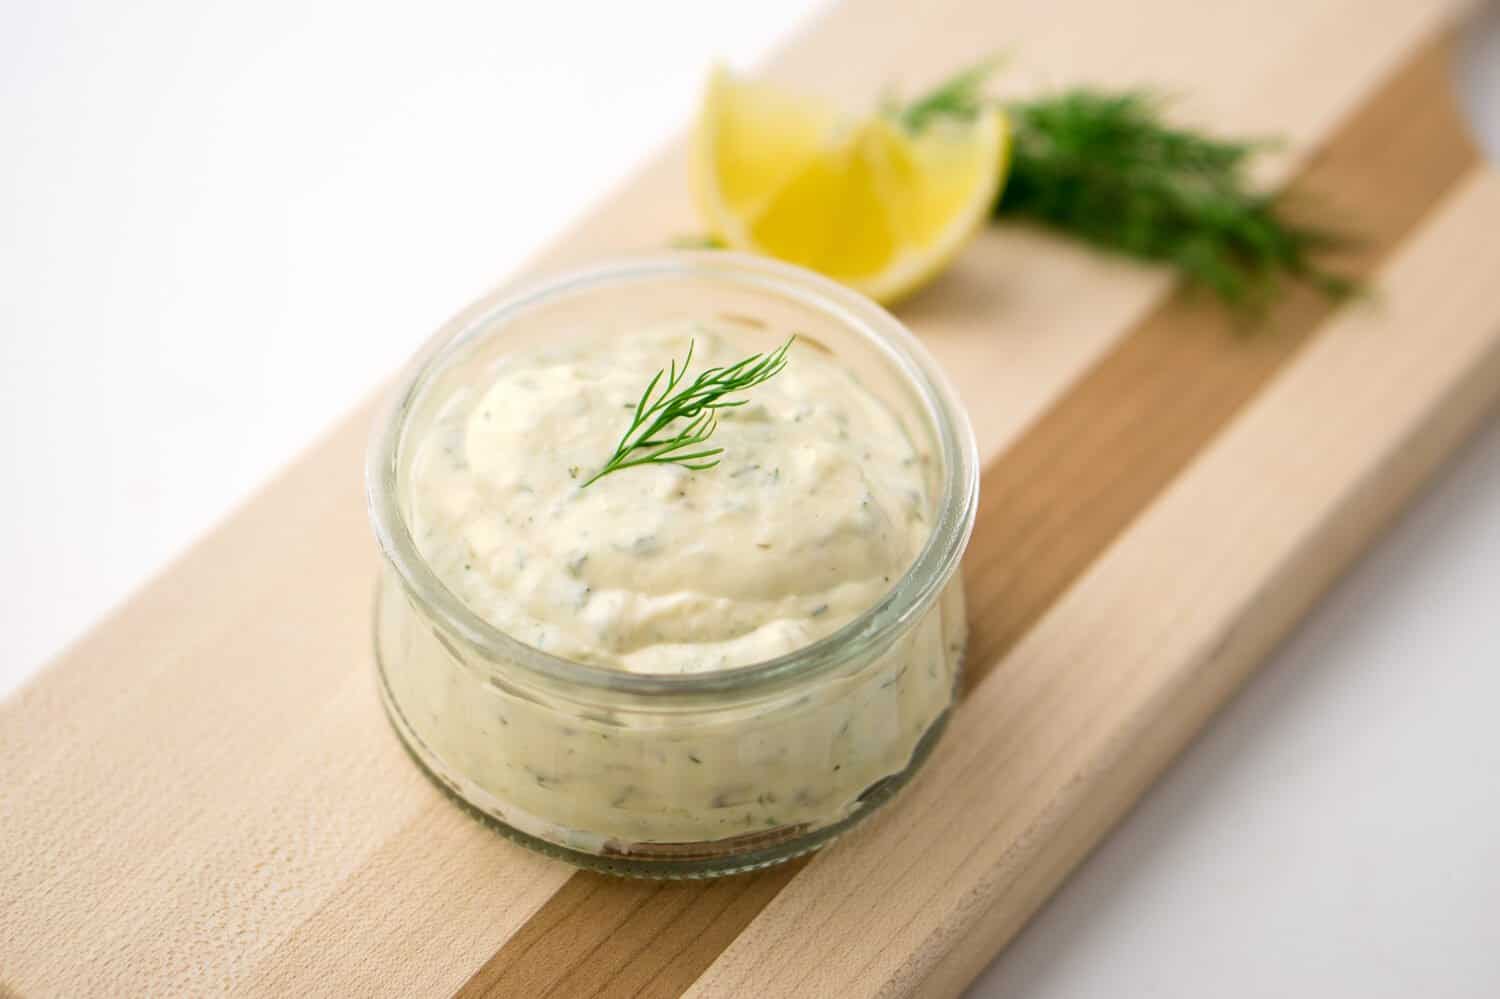 Homemade tartar sauce on white background. Made of fresh mayonnaise, lemon and various herbs. This classic creamy sauce is delicious with deep fried fish, seafood and many other dishes.